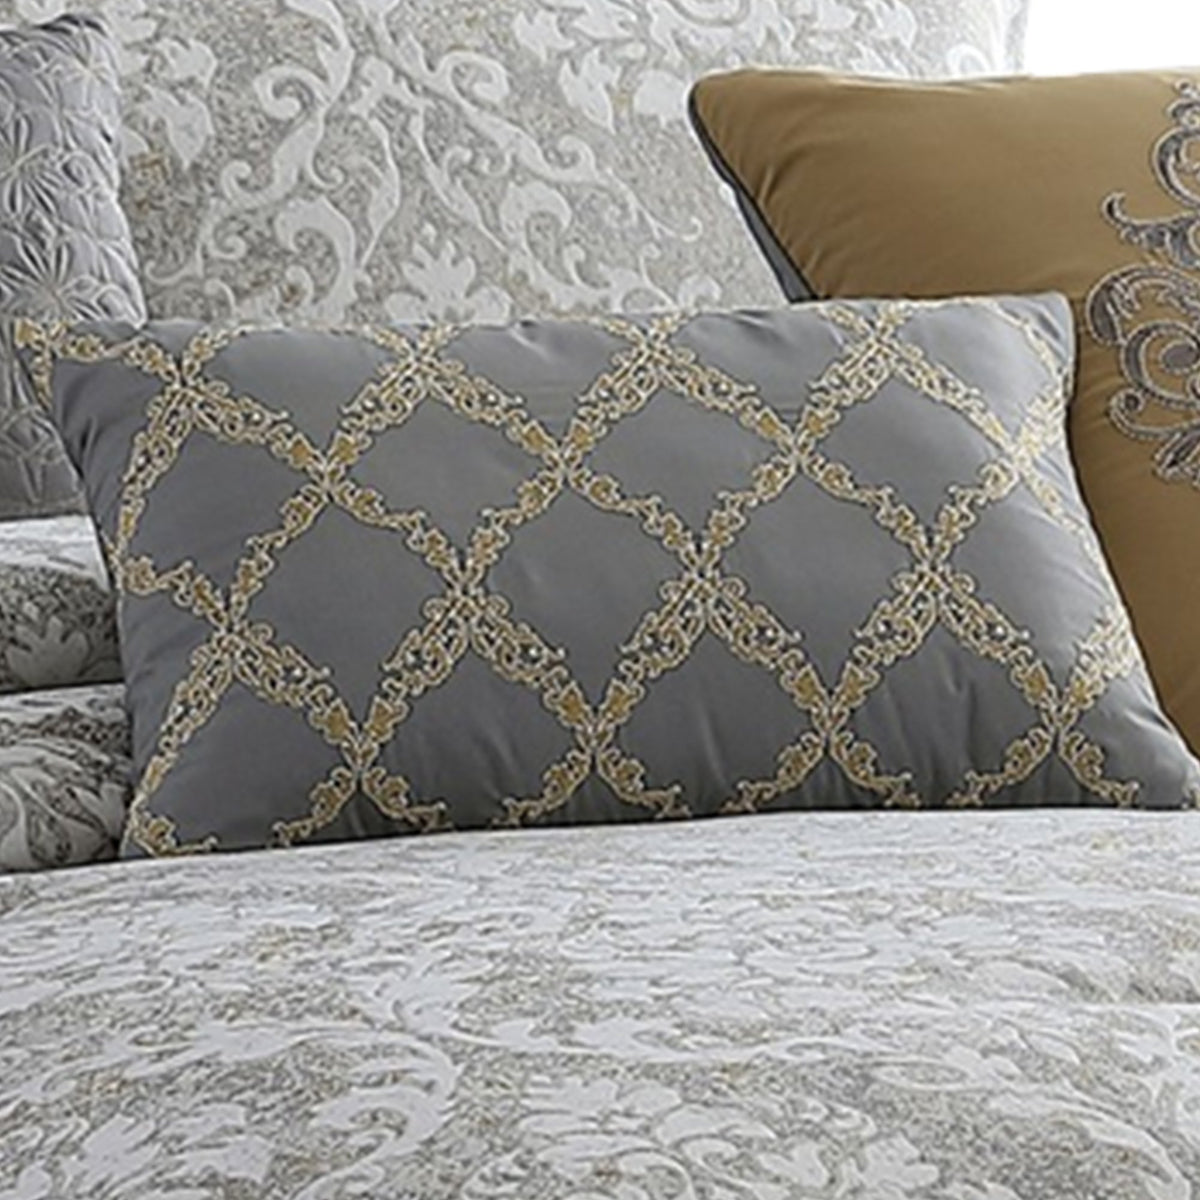 9 Piece King Polyester Comforter Set with Medallion Print, Gray and Gold - BM225181